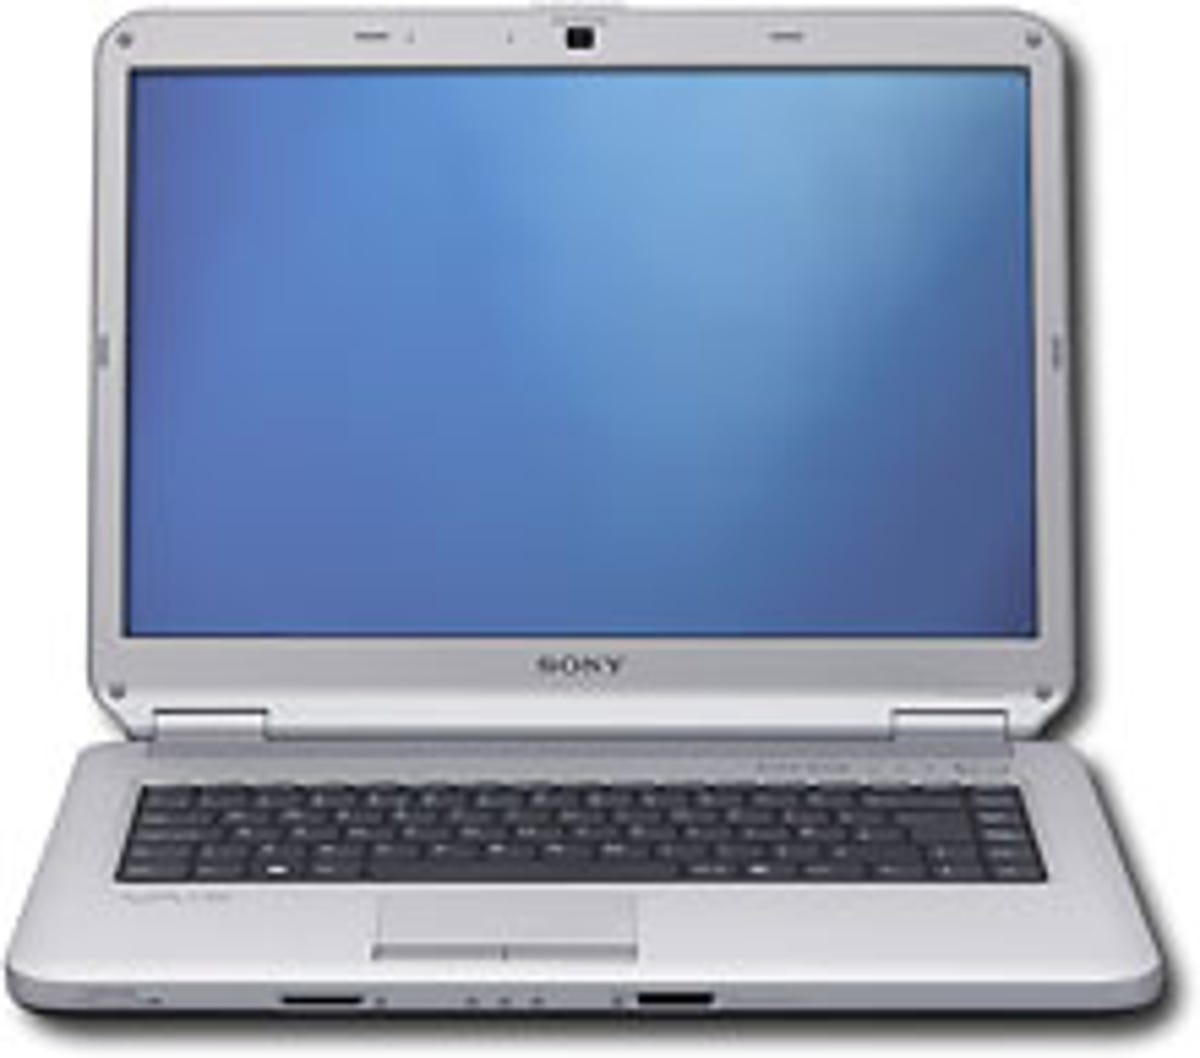 Sony Vaio laptops sold at retail stores are among a number of models from a variety of PC makers that have processors that don't support Windows 7 XP mode